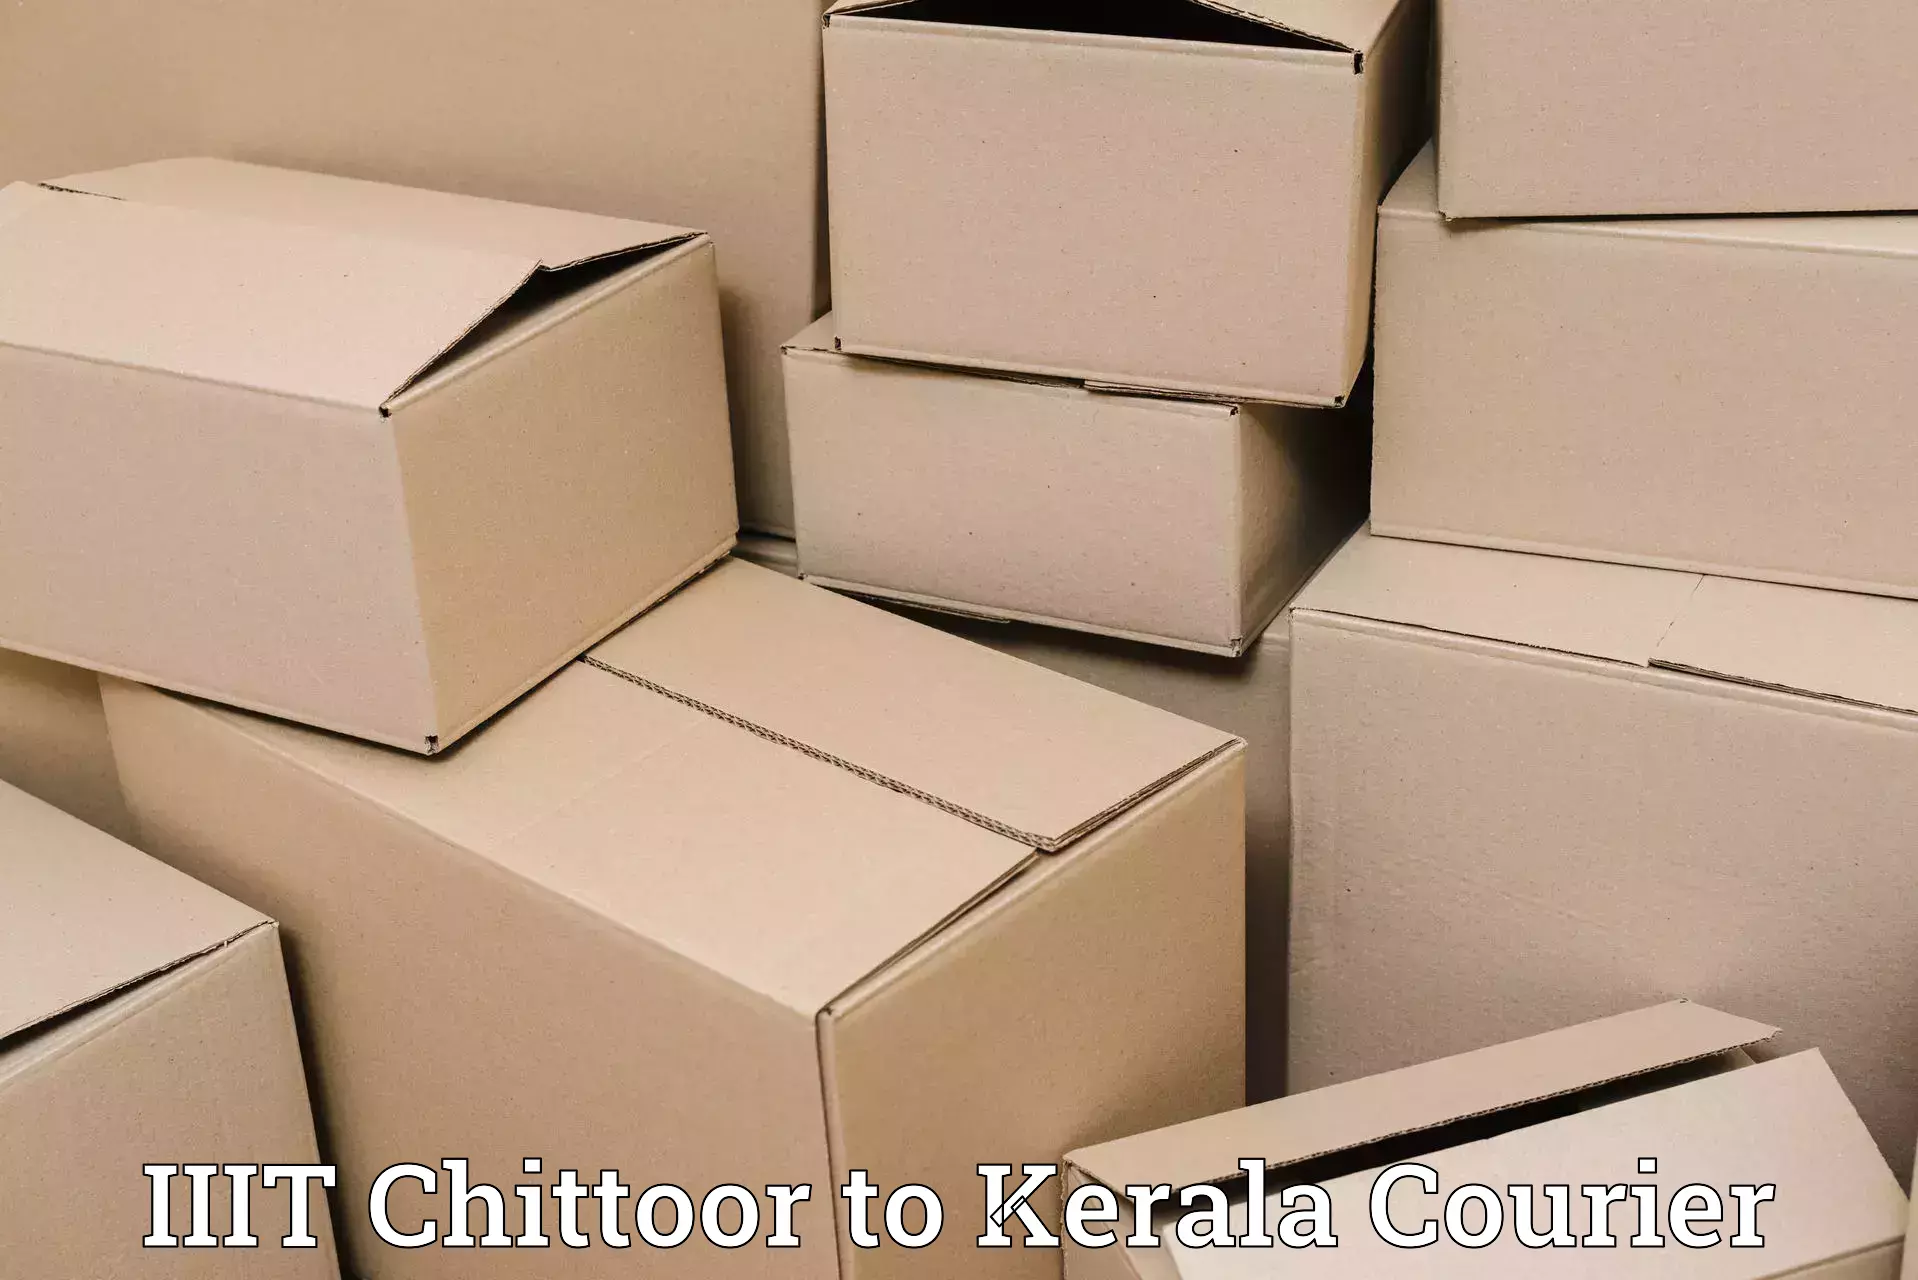 Express delivery network IIIT Chittoor to Kerala